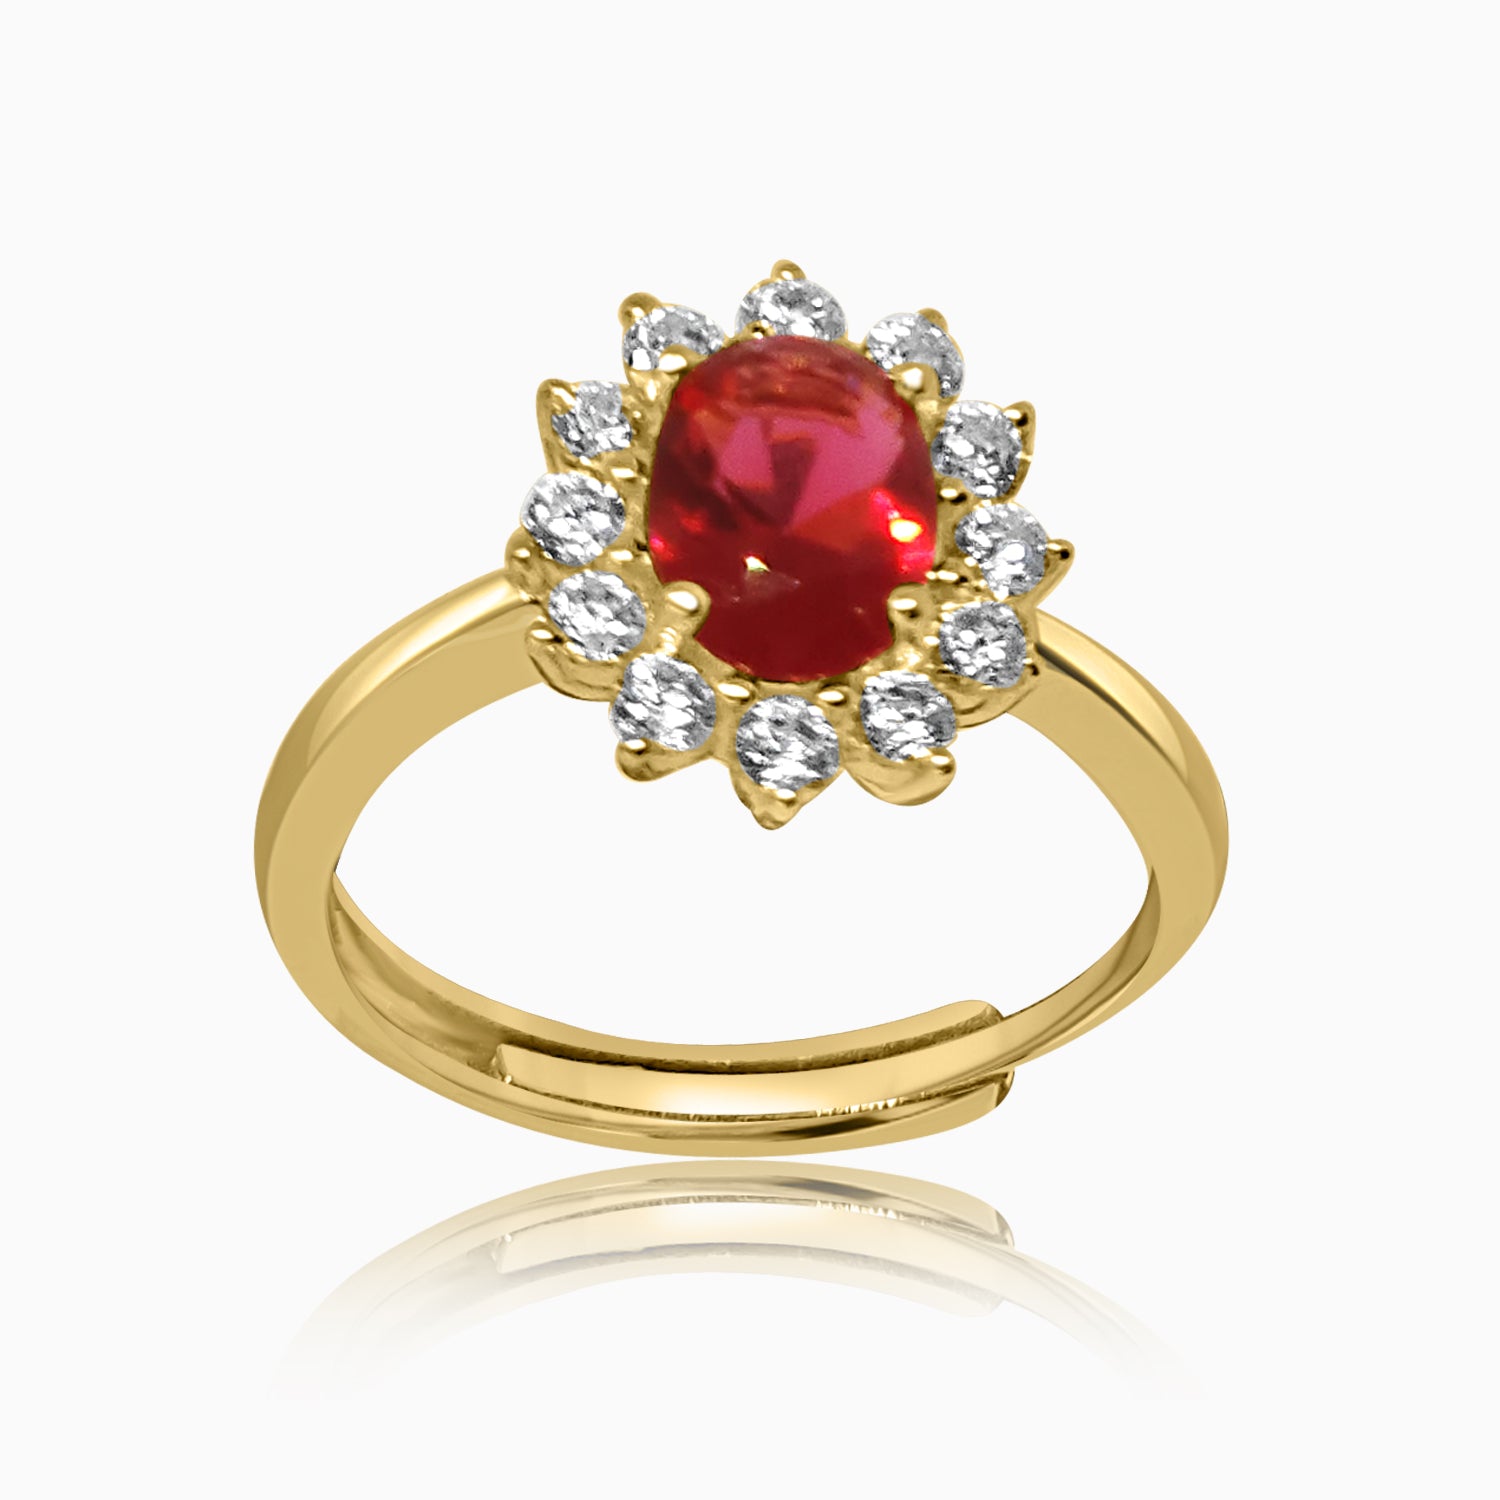 Silver Gold Sparkling Ruby Red Flower Ring